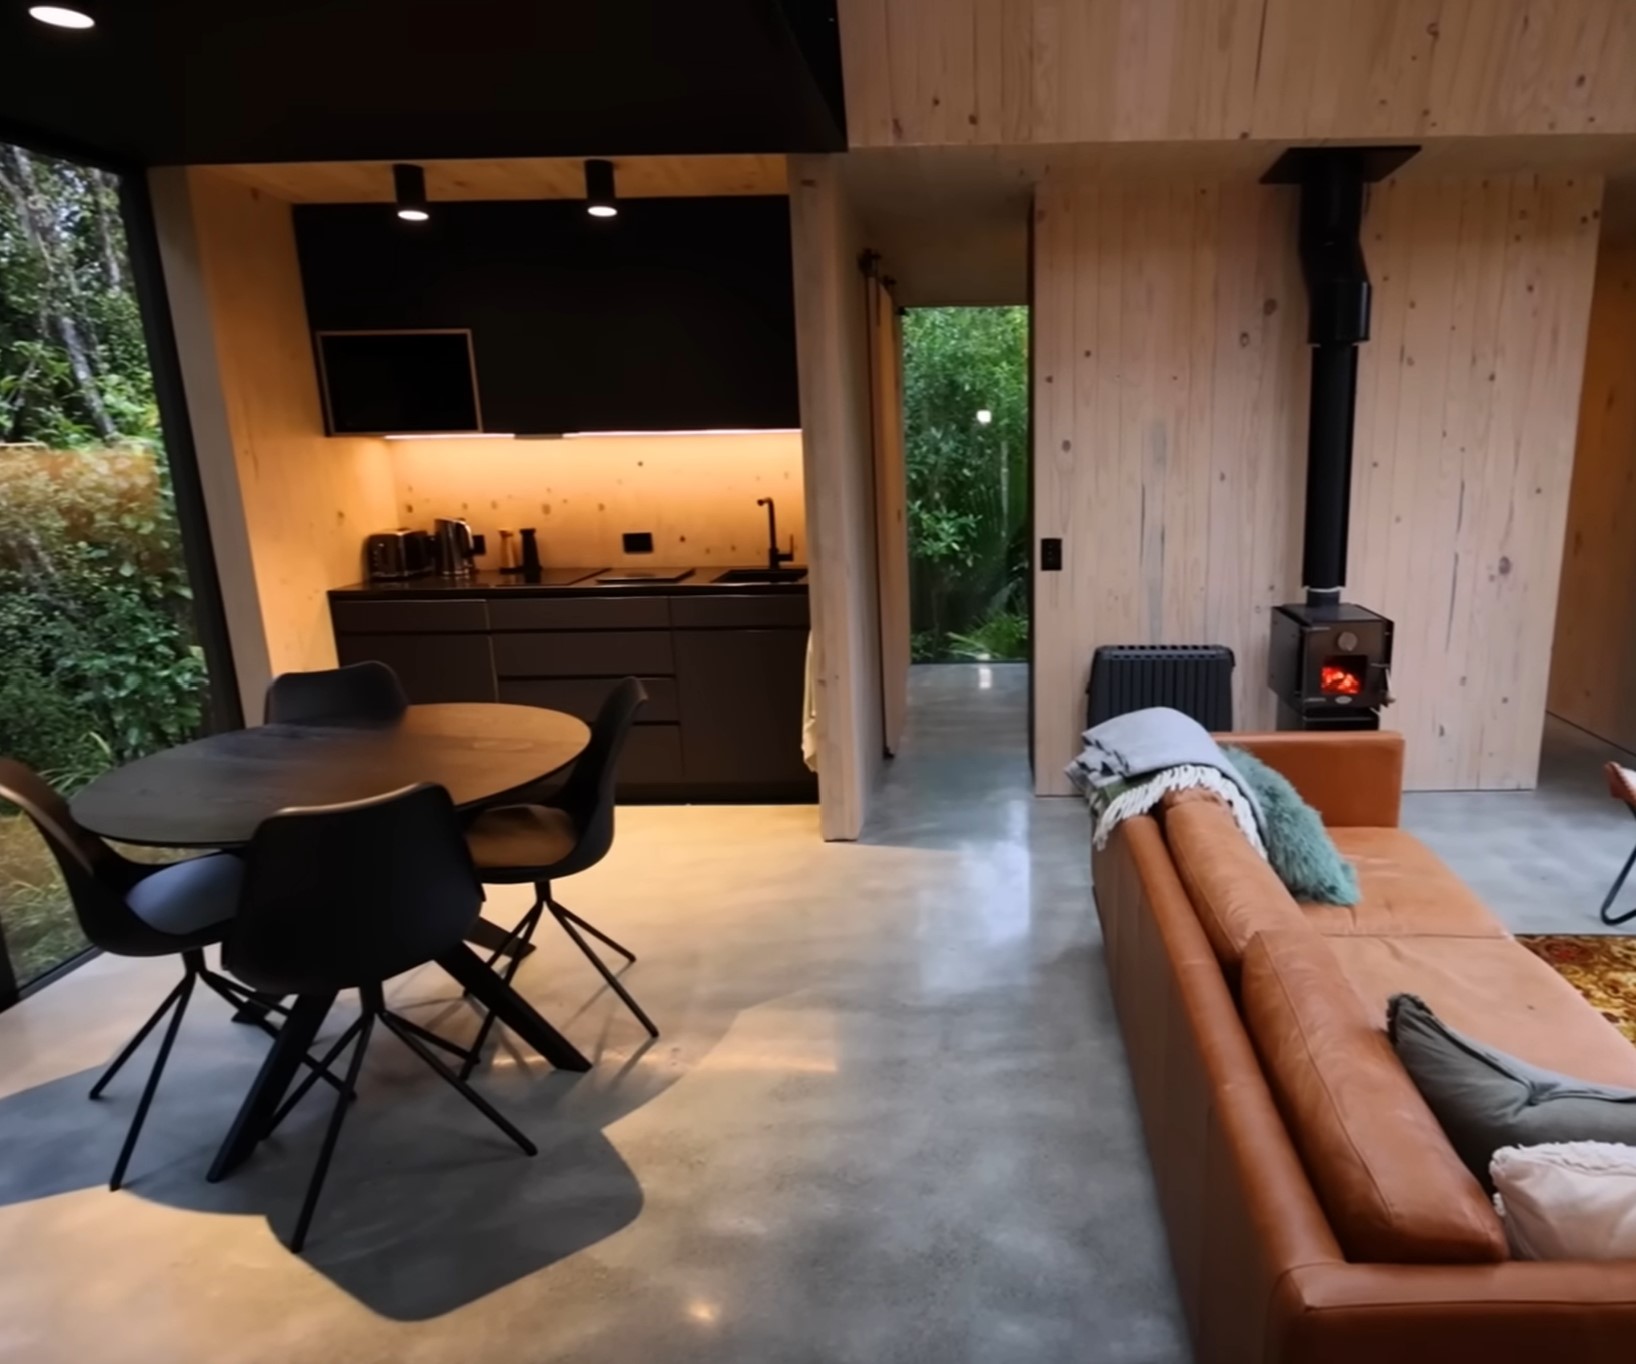 Inside the beautiful modenr cabin, showing the livingroom, kitchen and flooring.